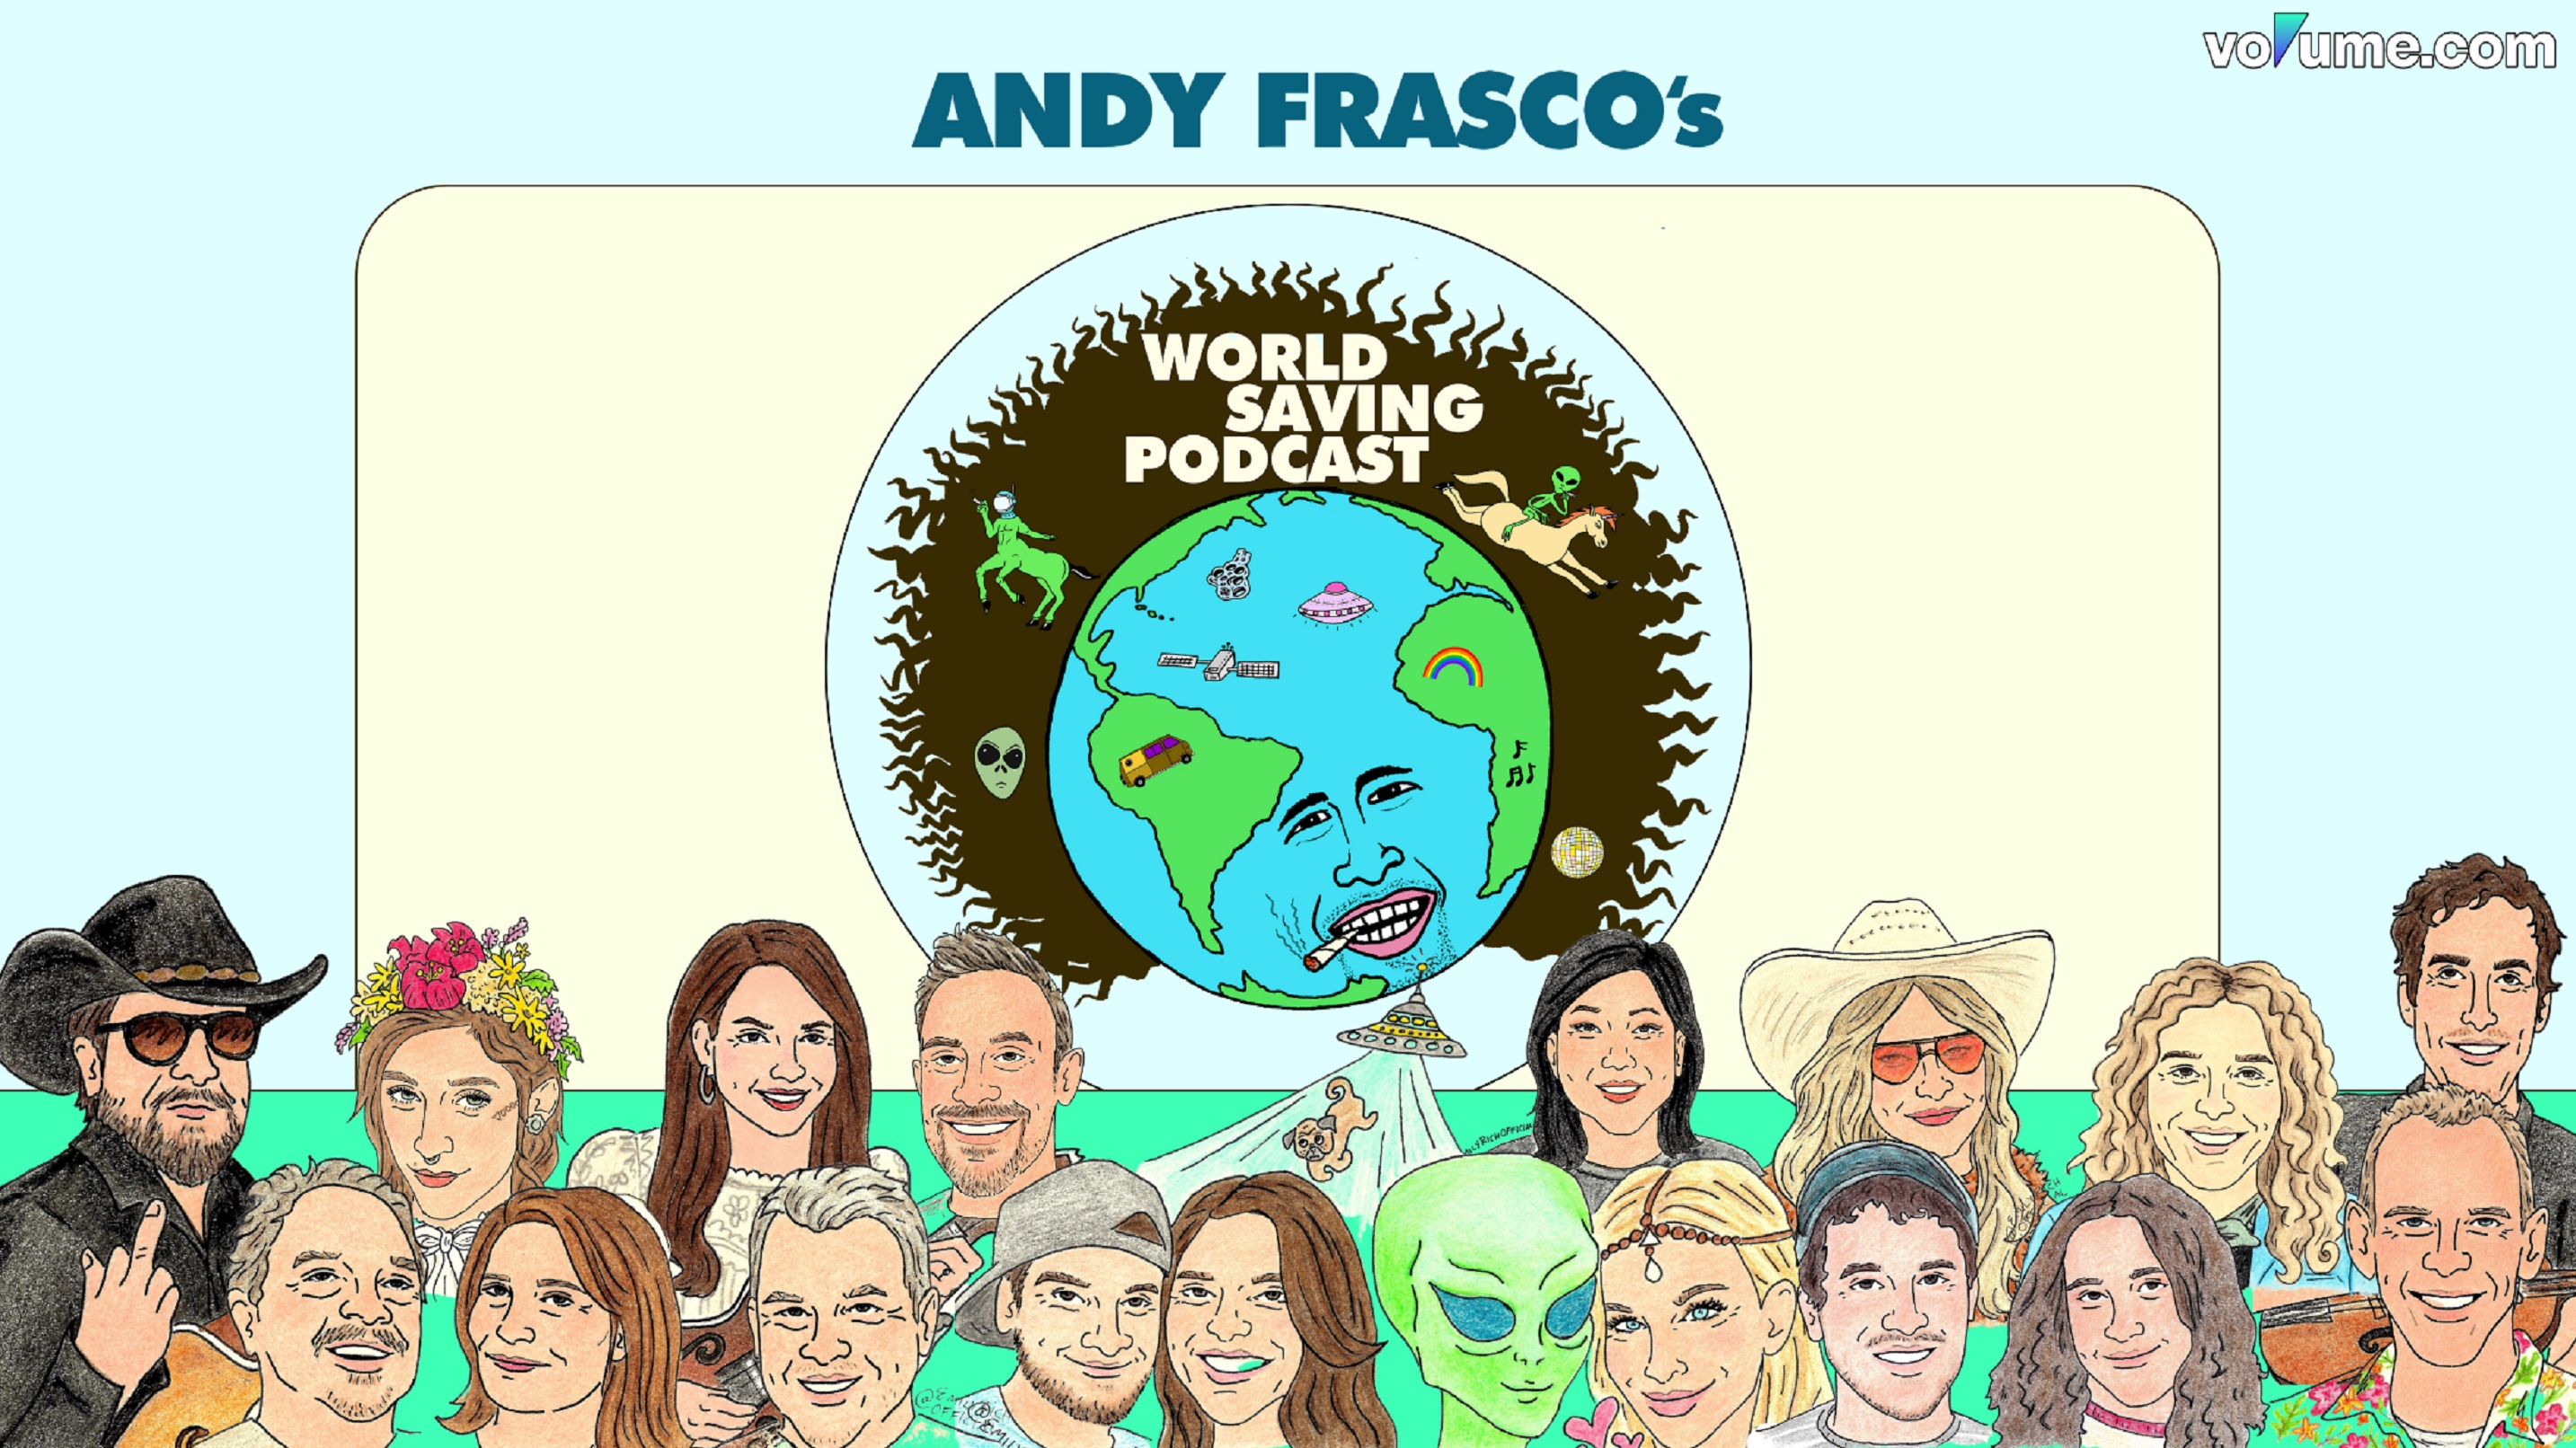 Volume.com Secures Exclusive Partnership With Andy Frasco's World Saving Podcast